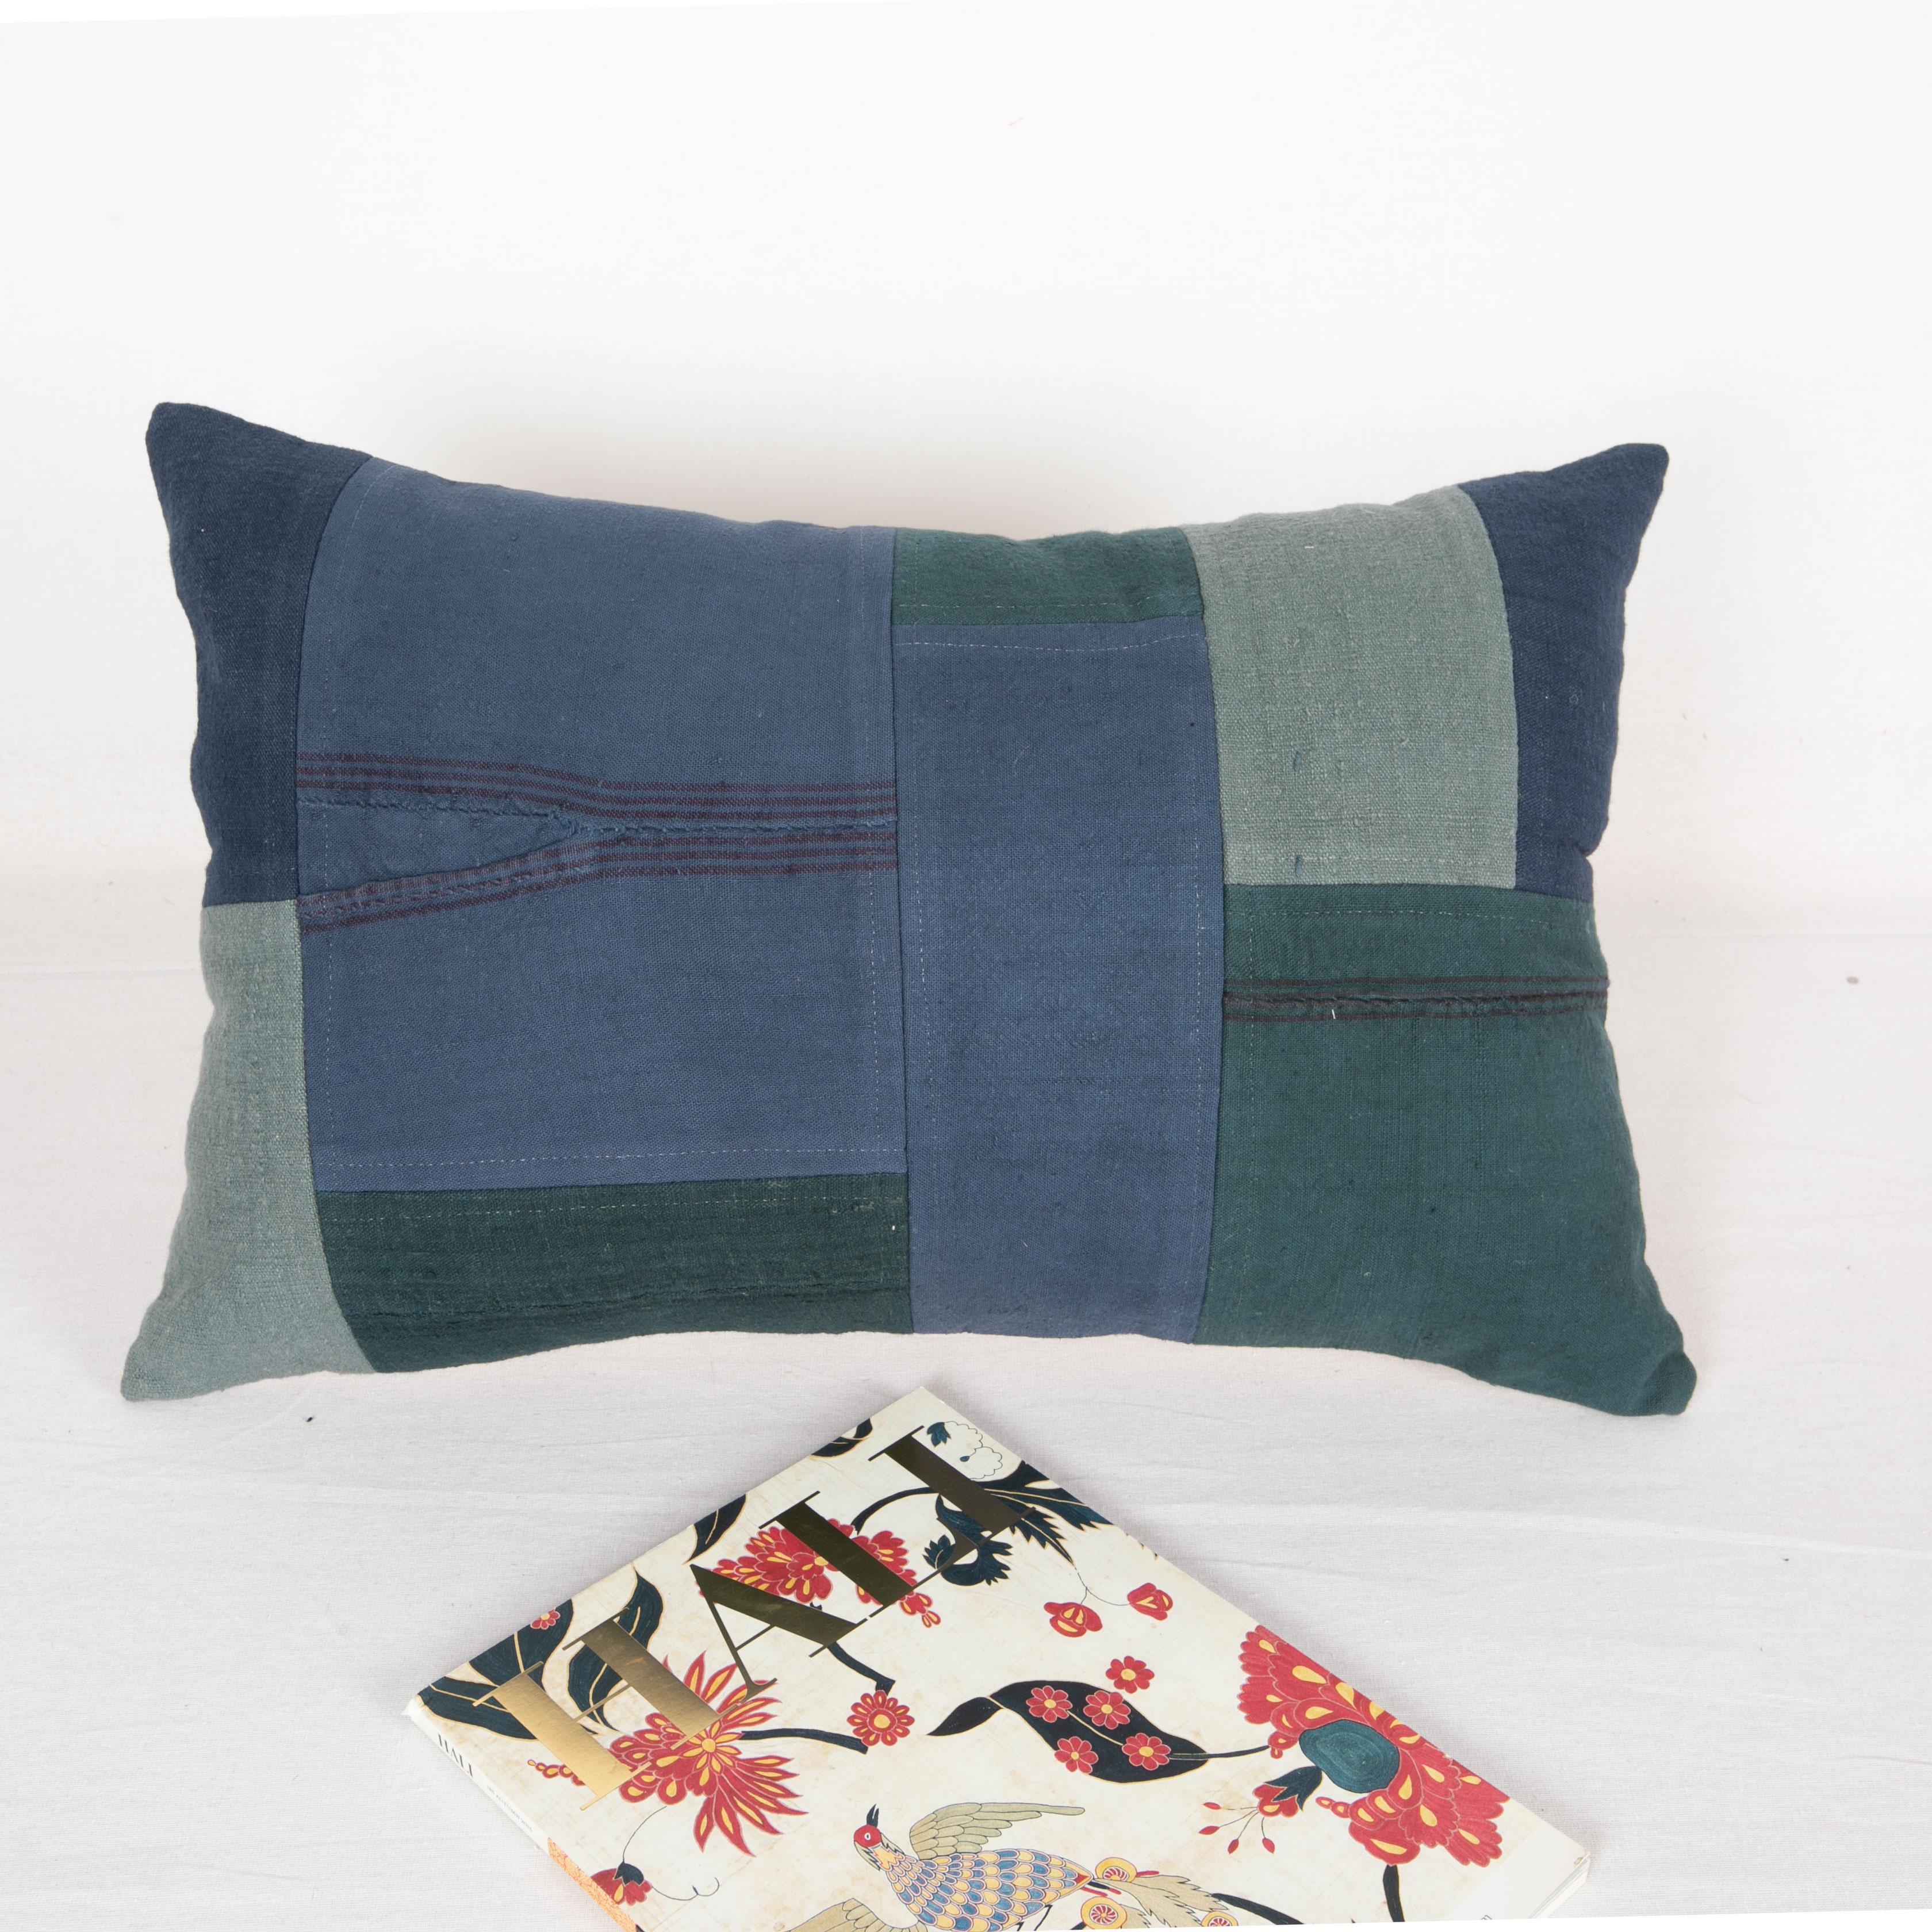 Rustic Patchwork Pillowcase Made from Recycled Anatolian Fabrics